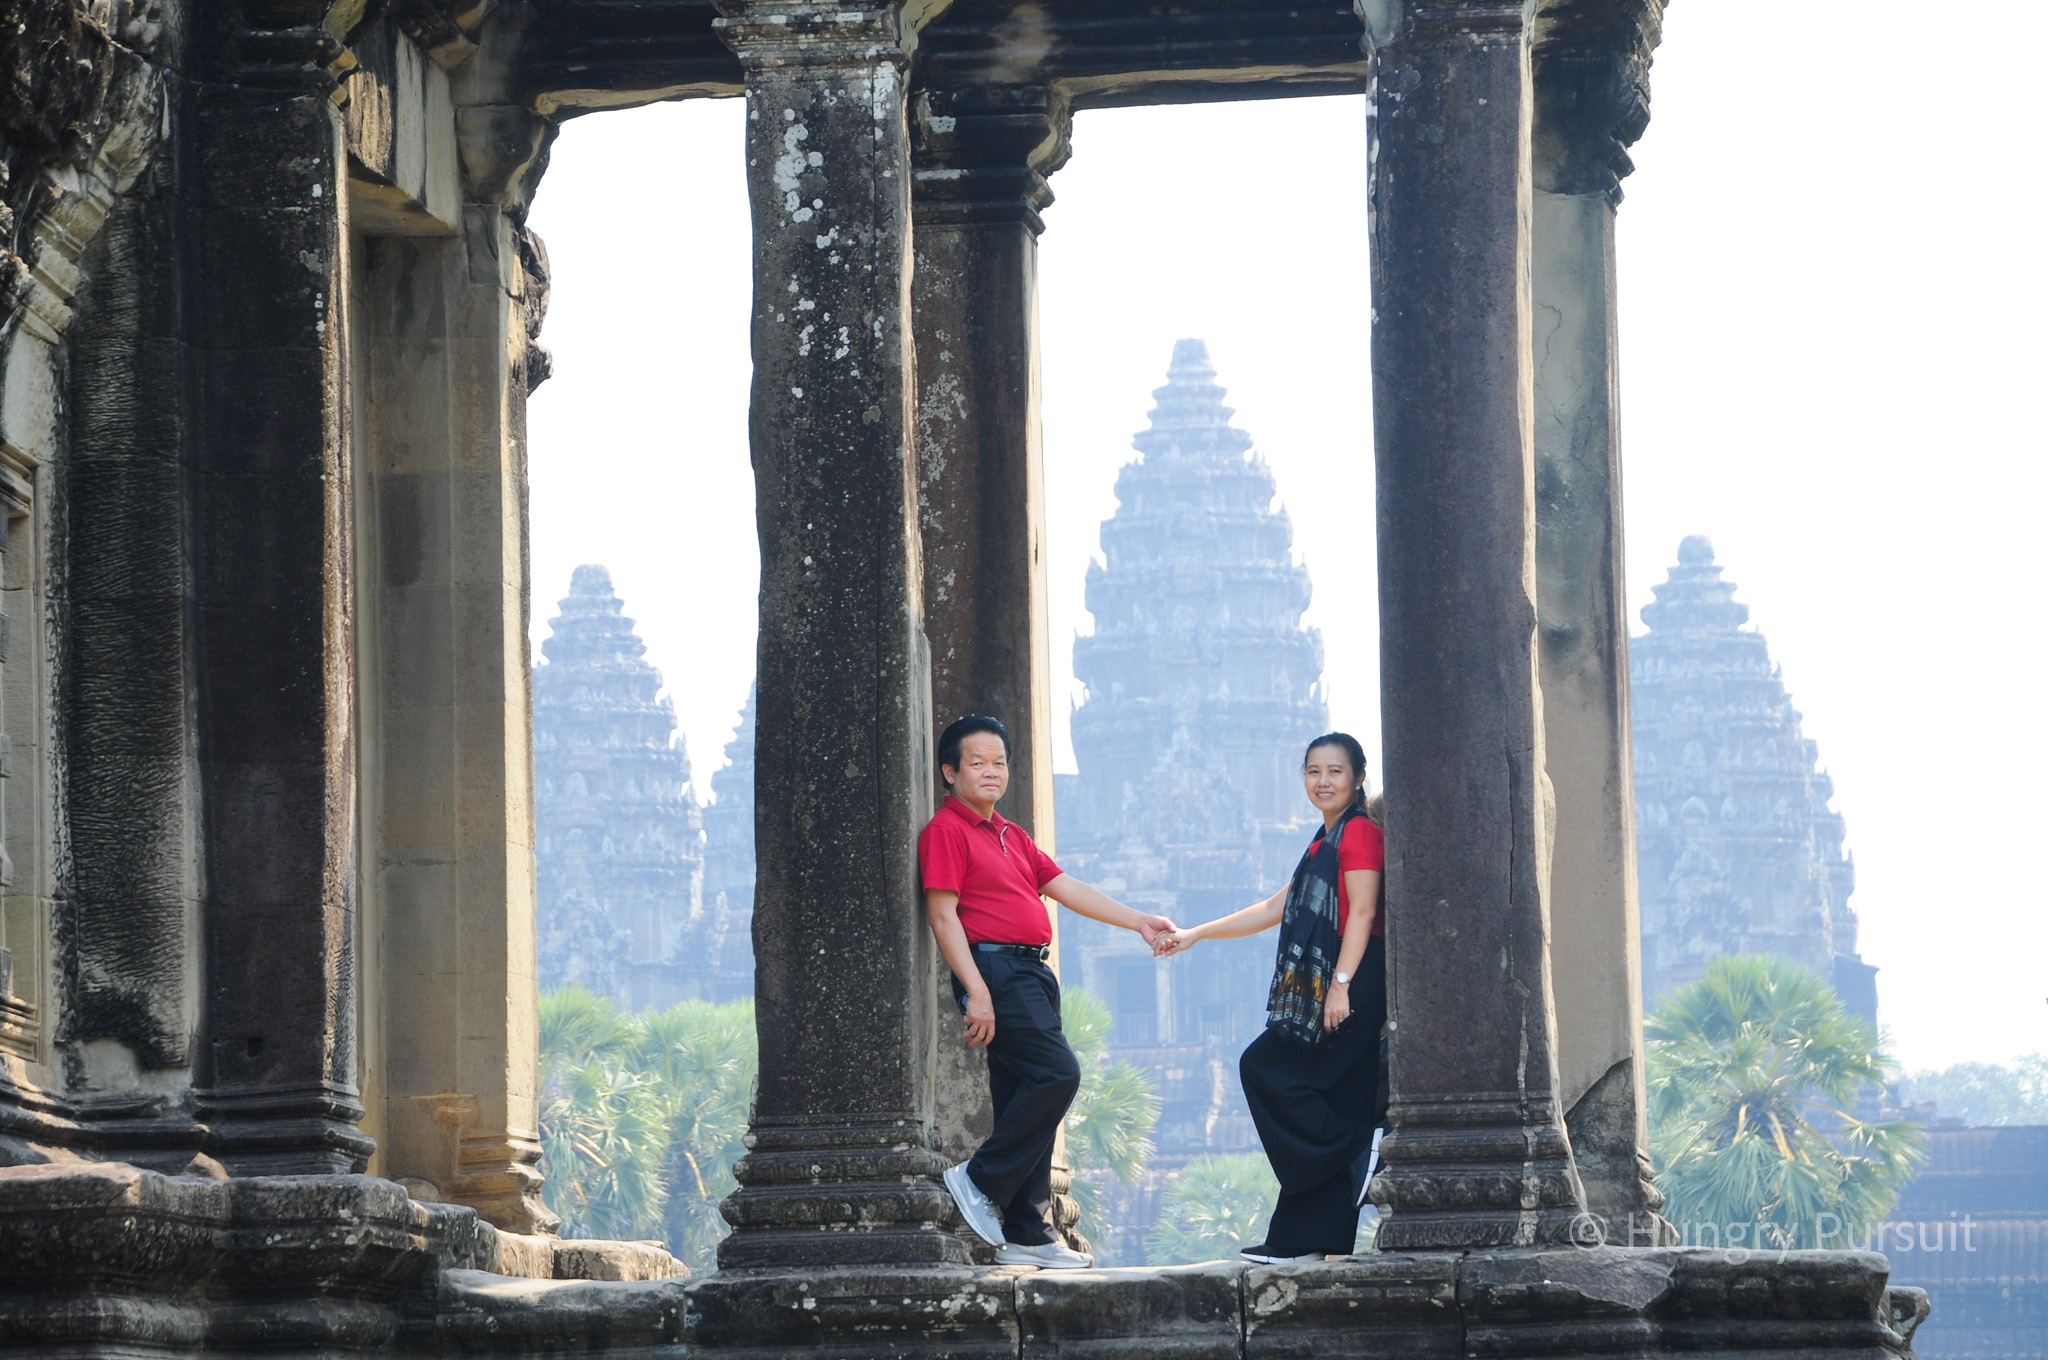 Mid-aged couple holding hands, standing in front of the majestic Angkor Wat temple in Cambodia.